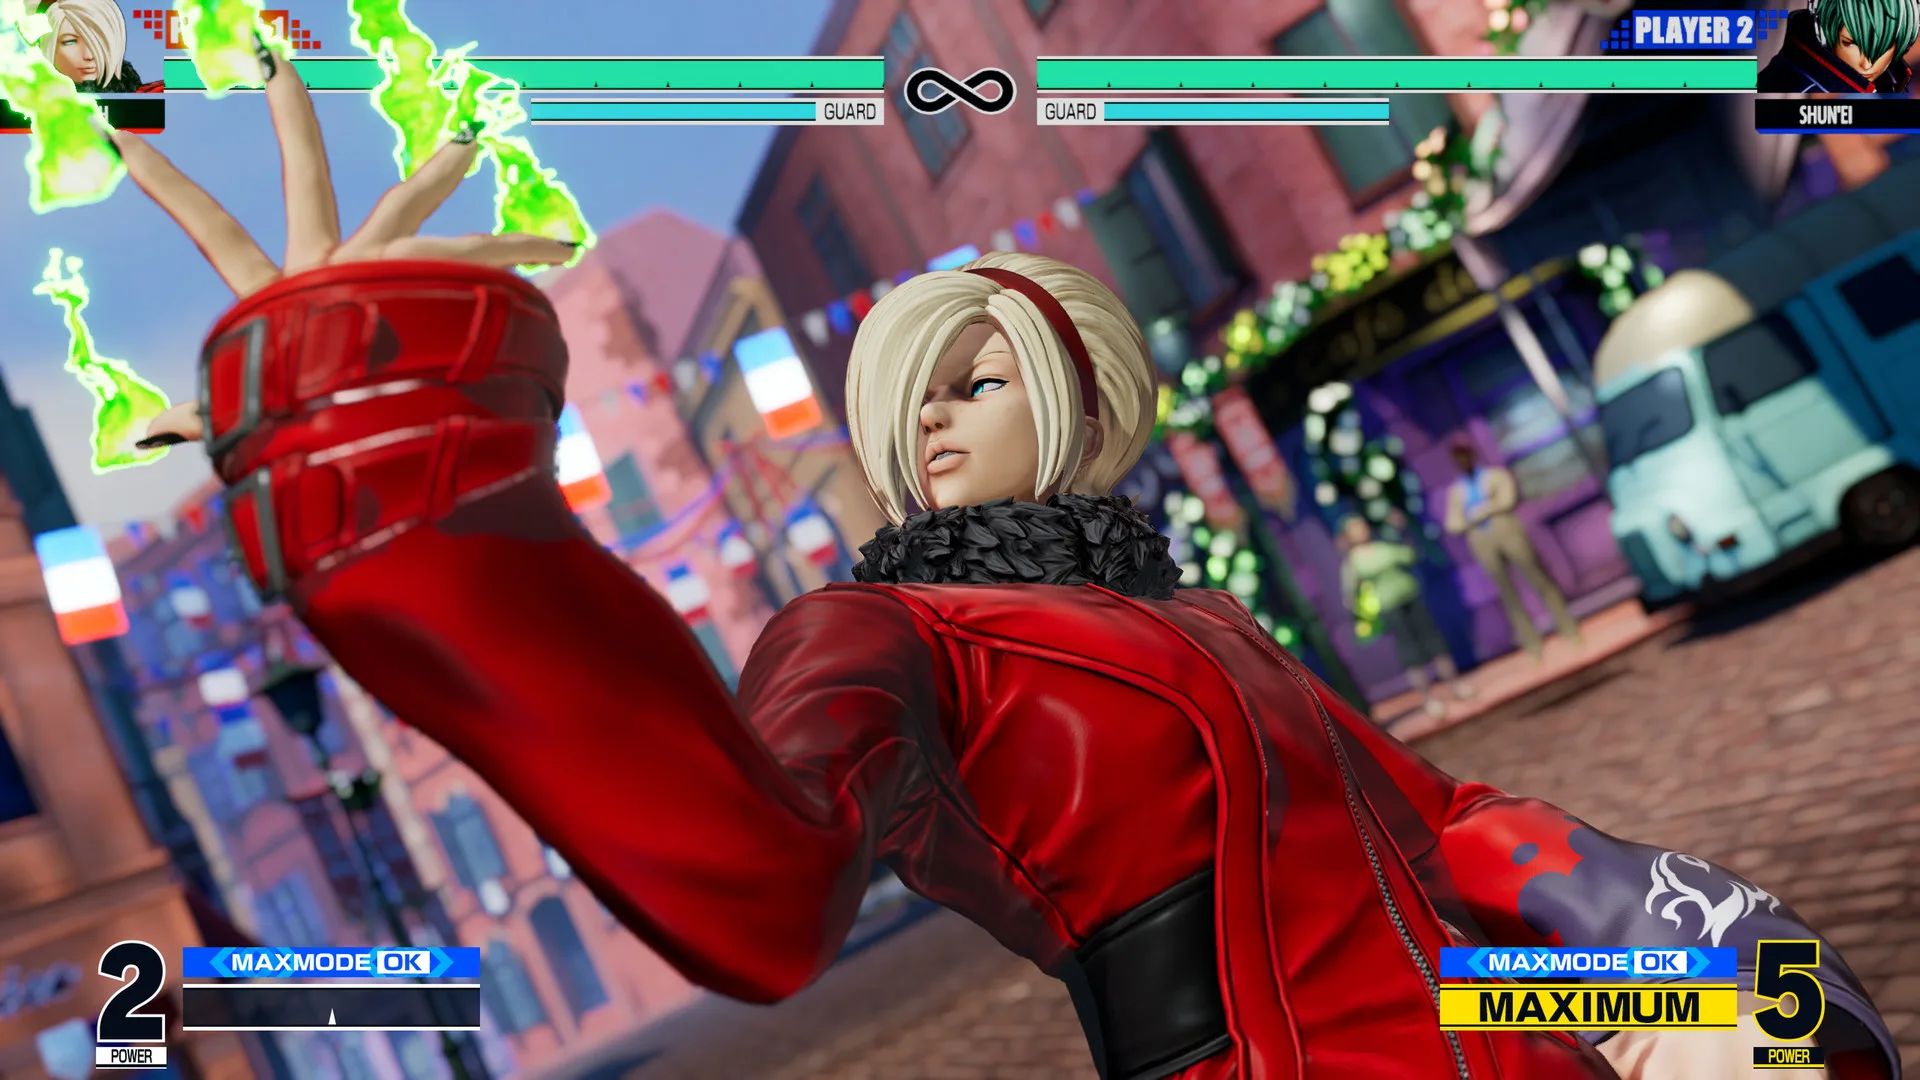 THE KING OF FIGHTERS XV Torrent